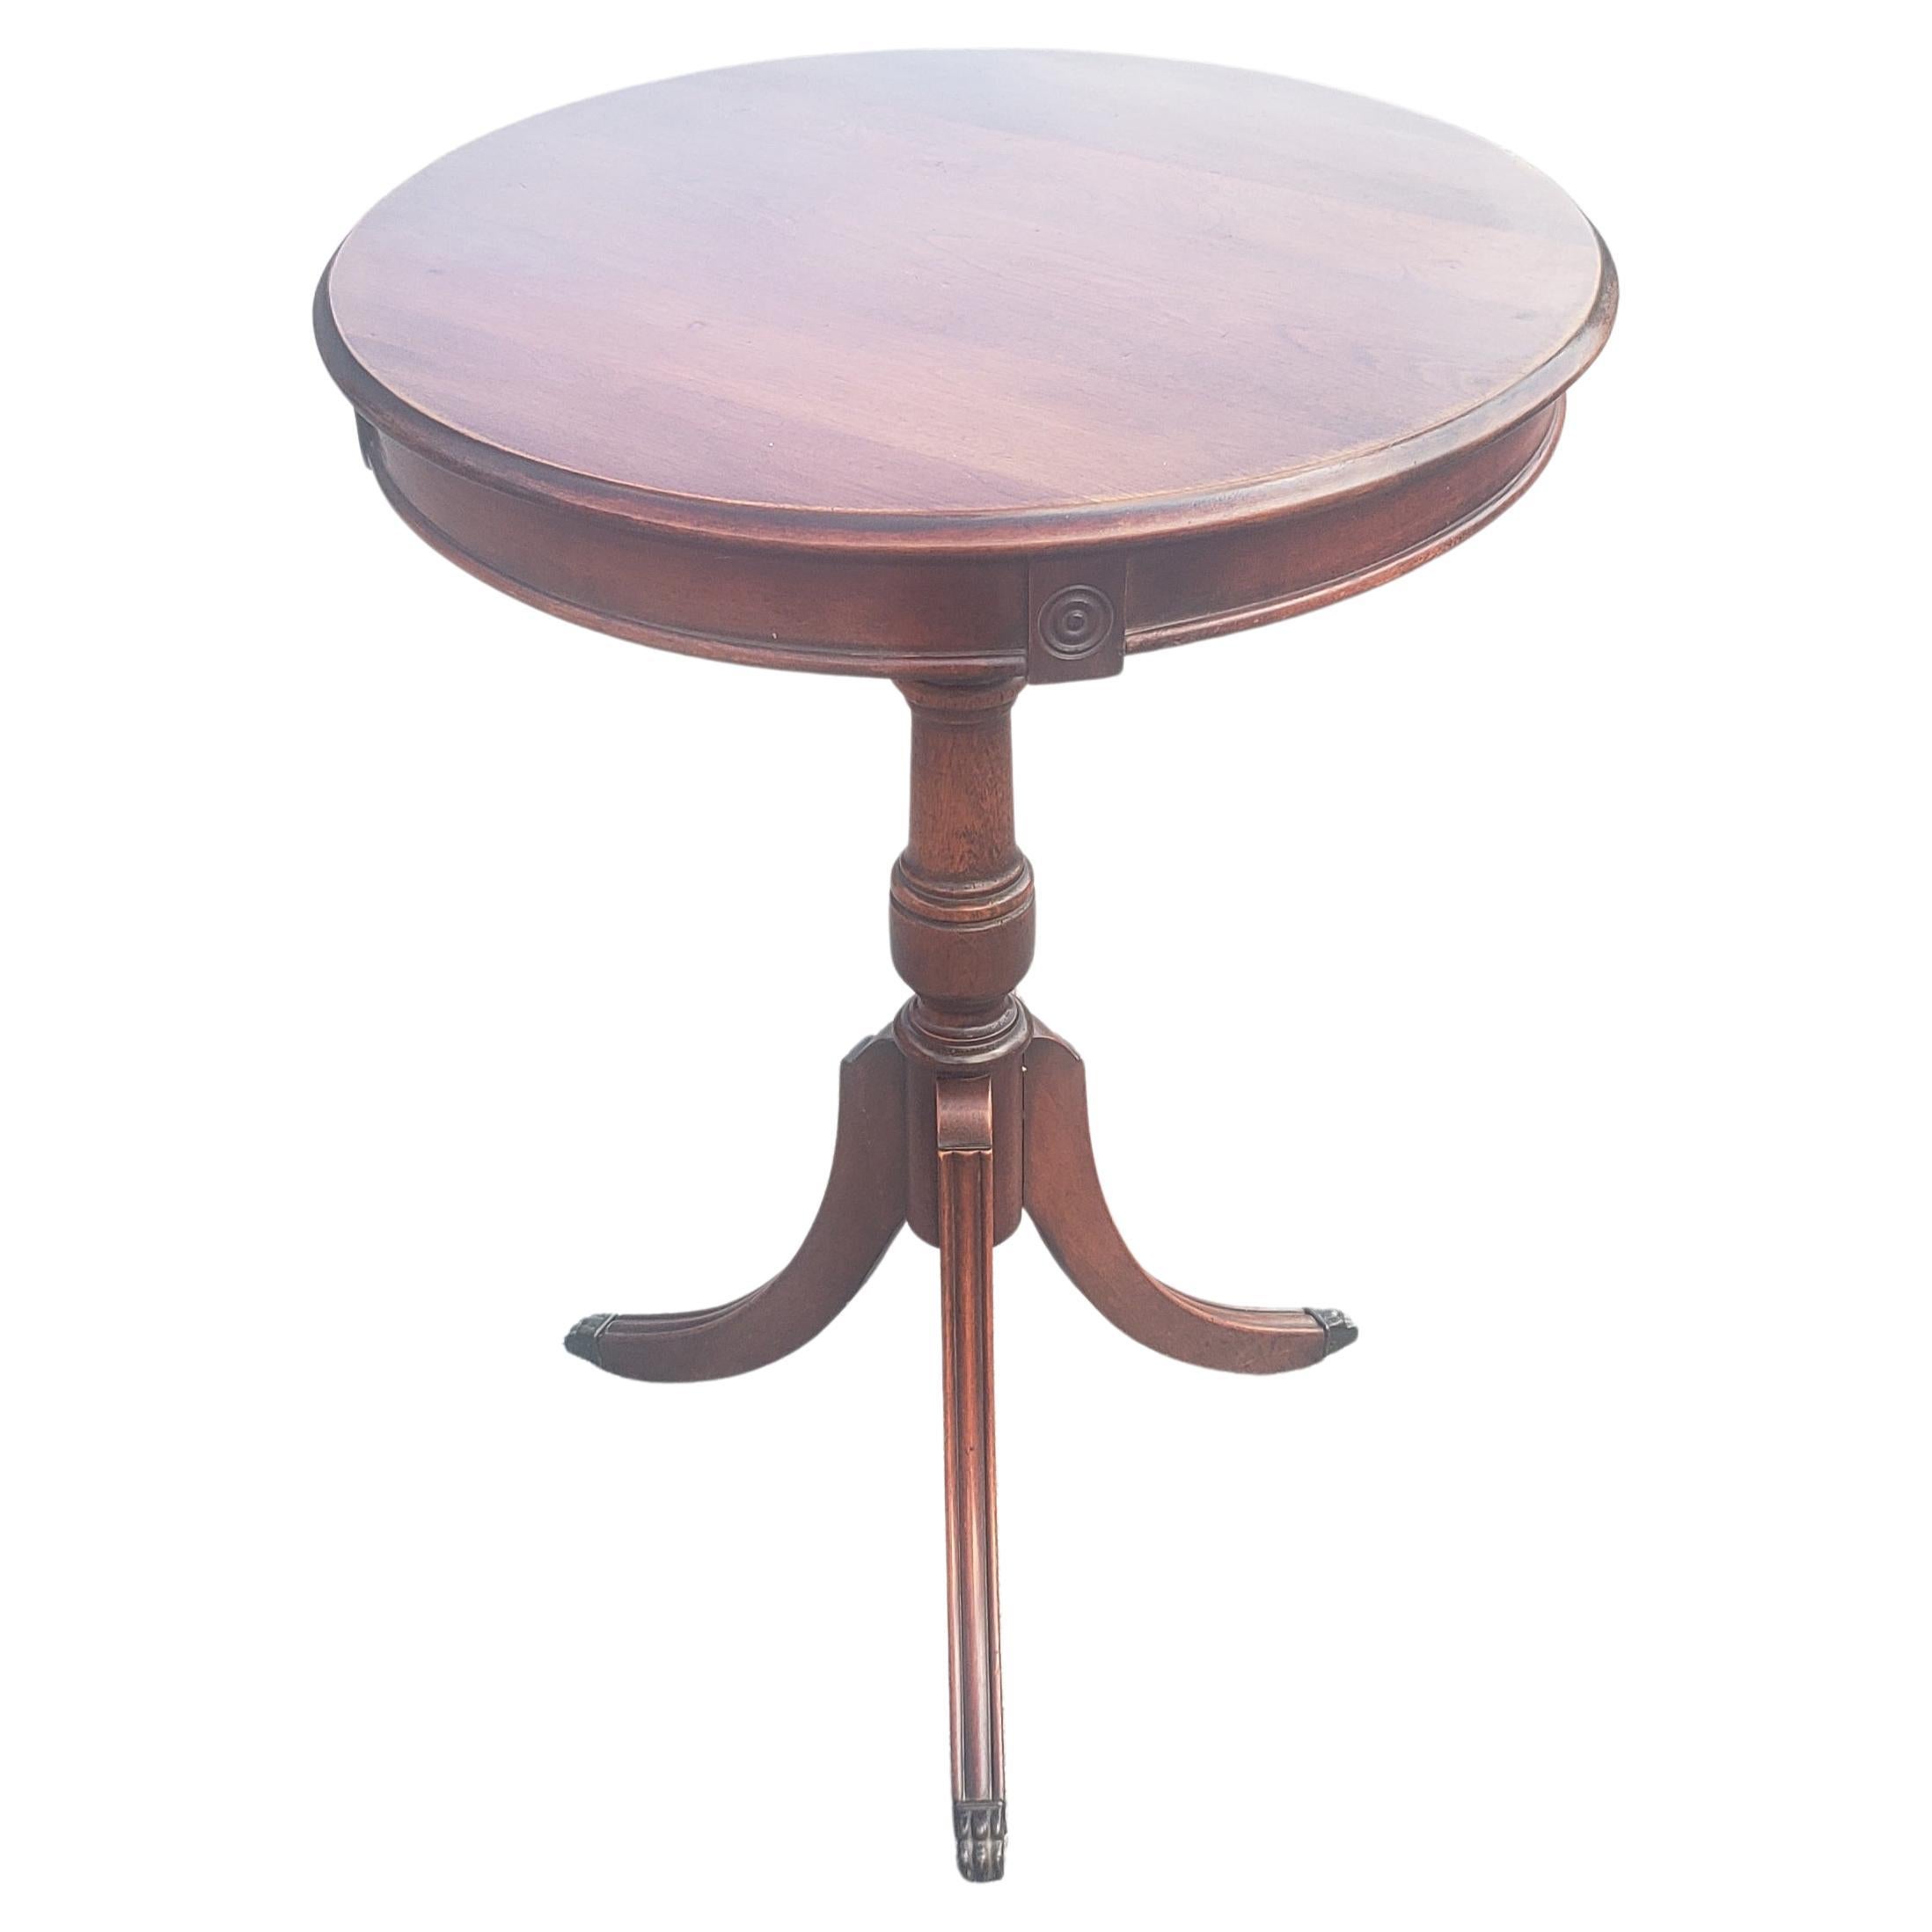 American Midcentury Mahogany Pedestal Tripod Drum Side Table with Paw Feet For Sale